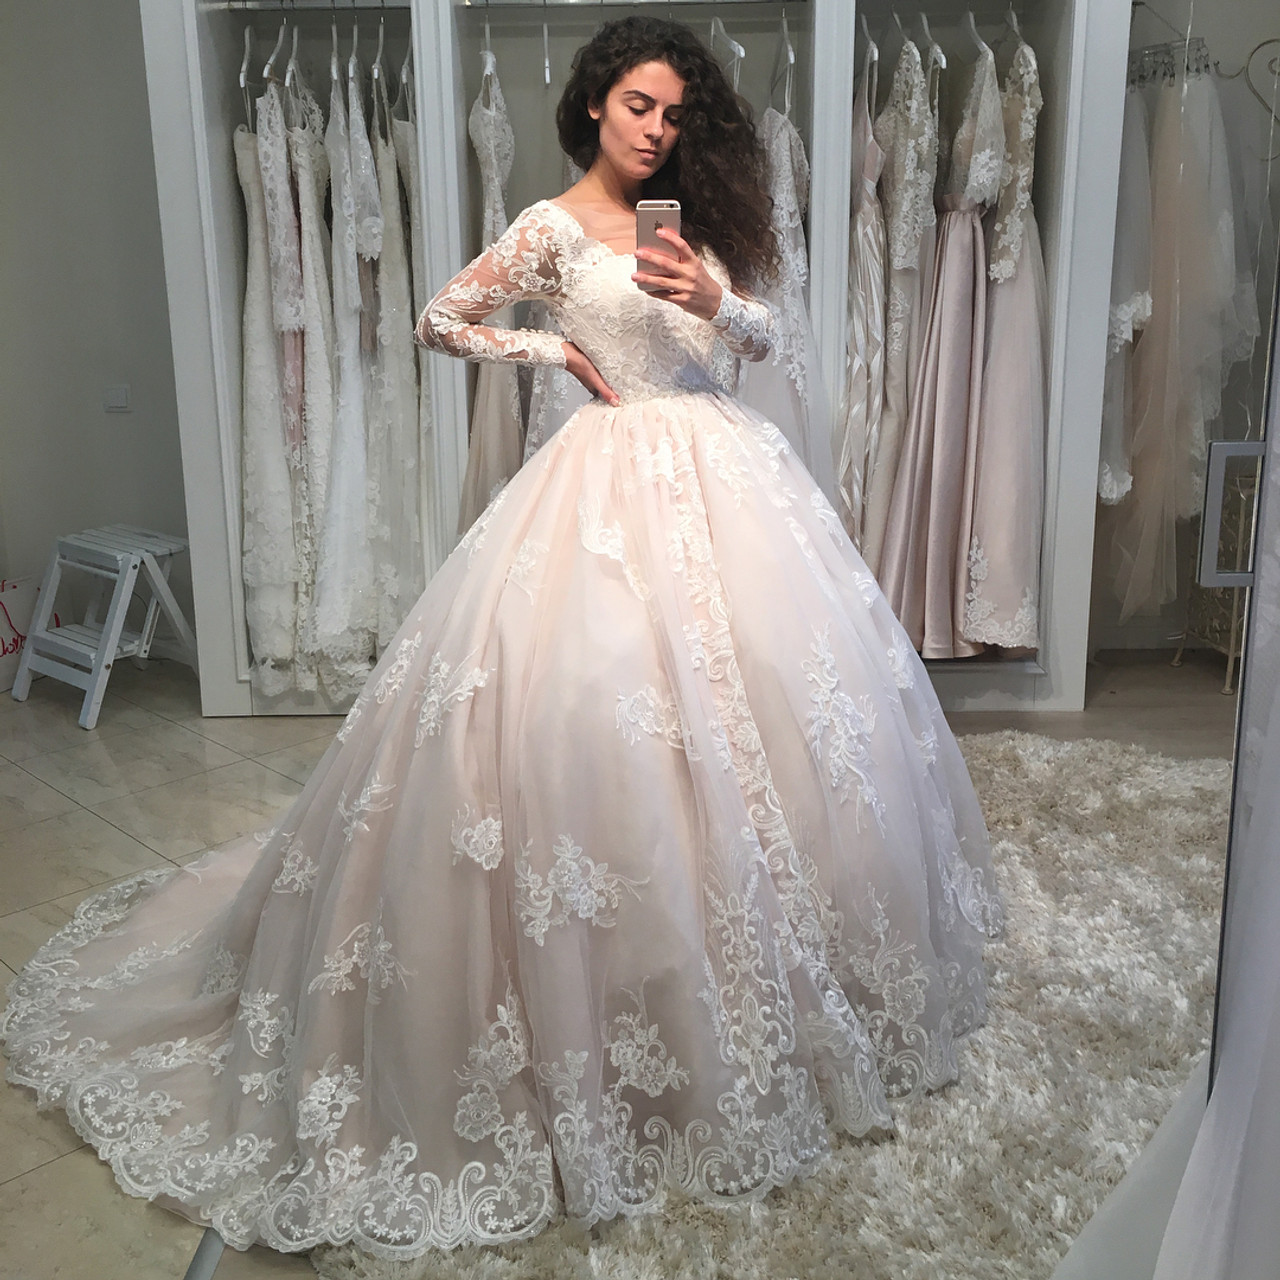 Disney's Fairy Tale Weddings & Honeymoons Unveils New Collection of Disney  Princess-Inspired Gowns and Bridesmaid Dresses | Walt Disney World News